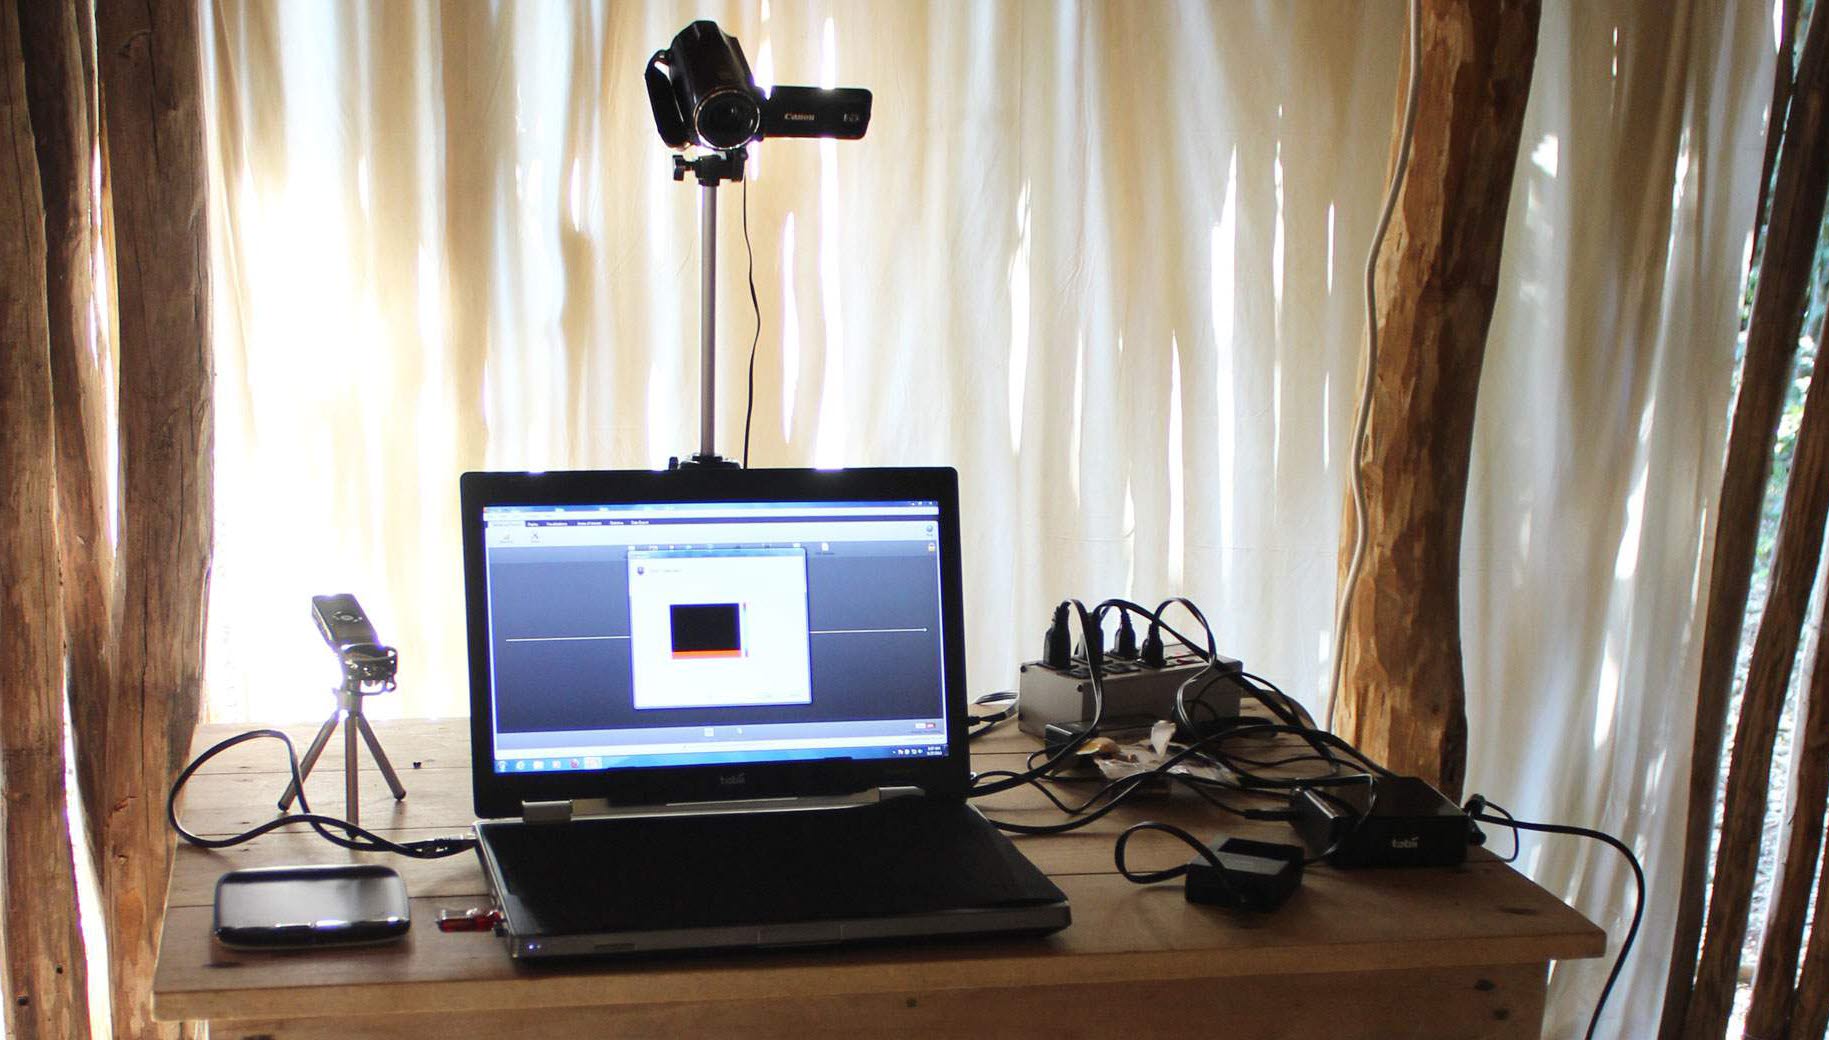 The test setup with a Tobii Pro X2-60 mounted on a laptop.